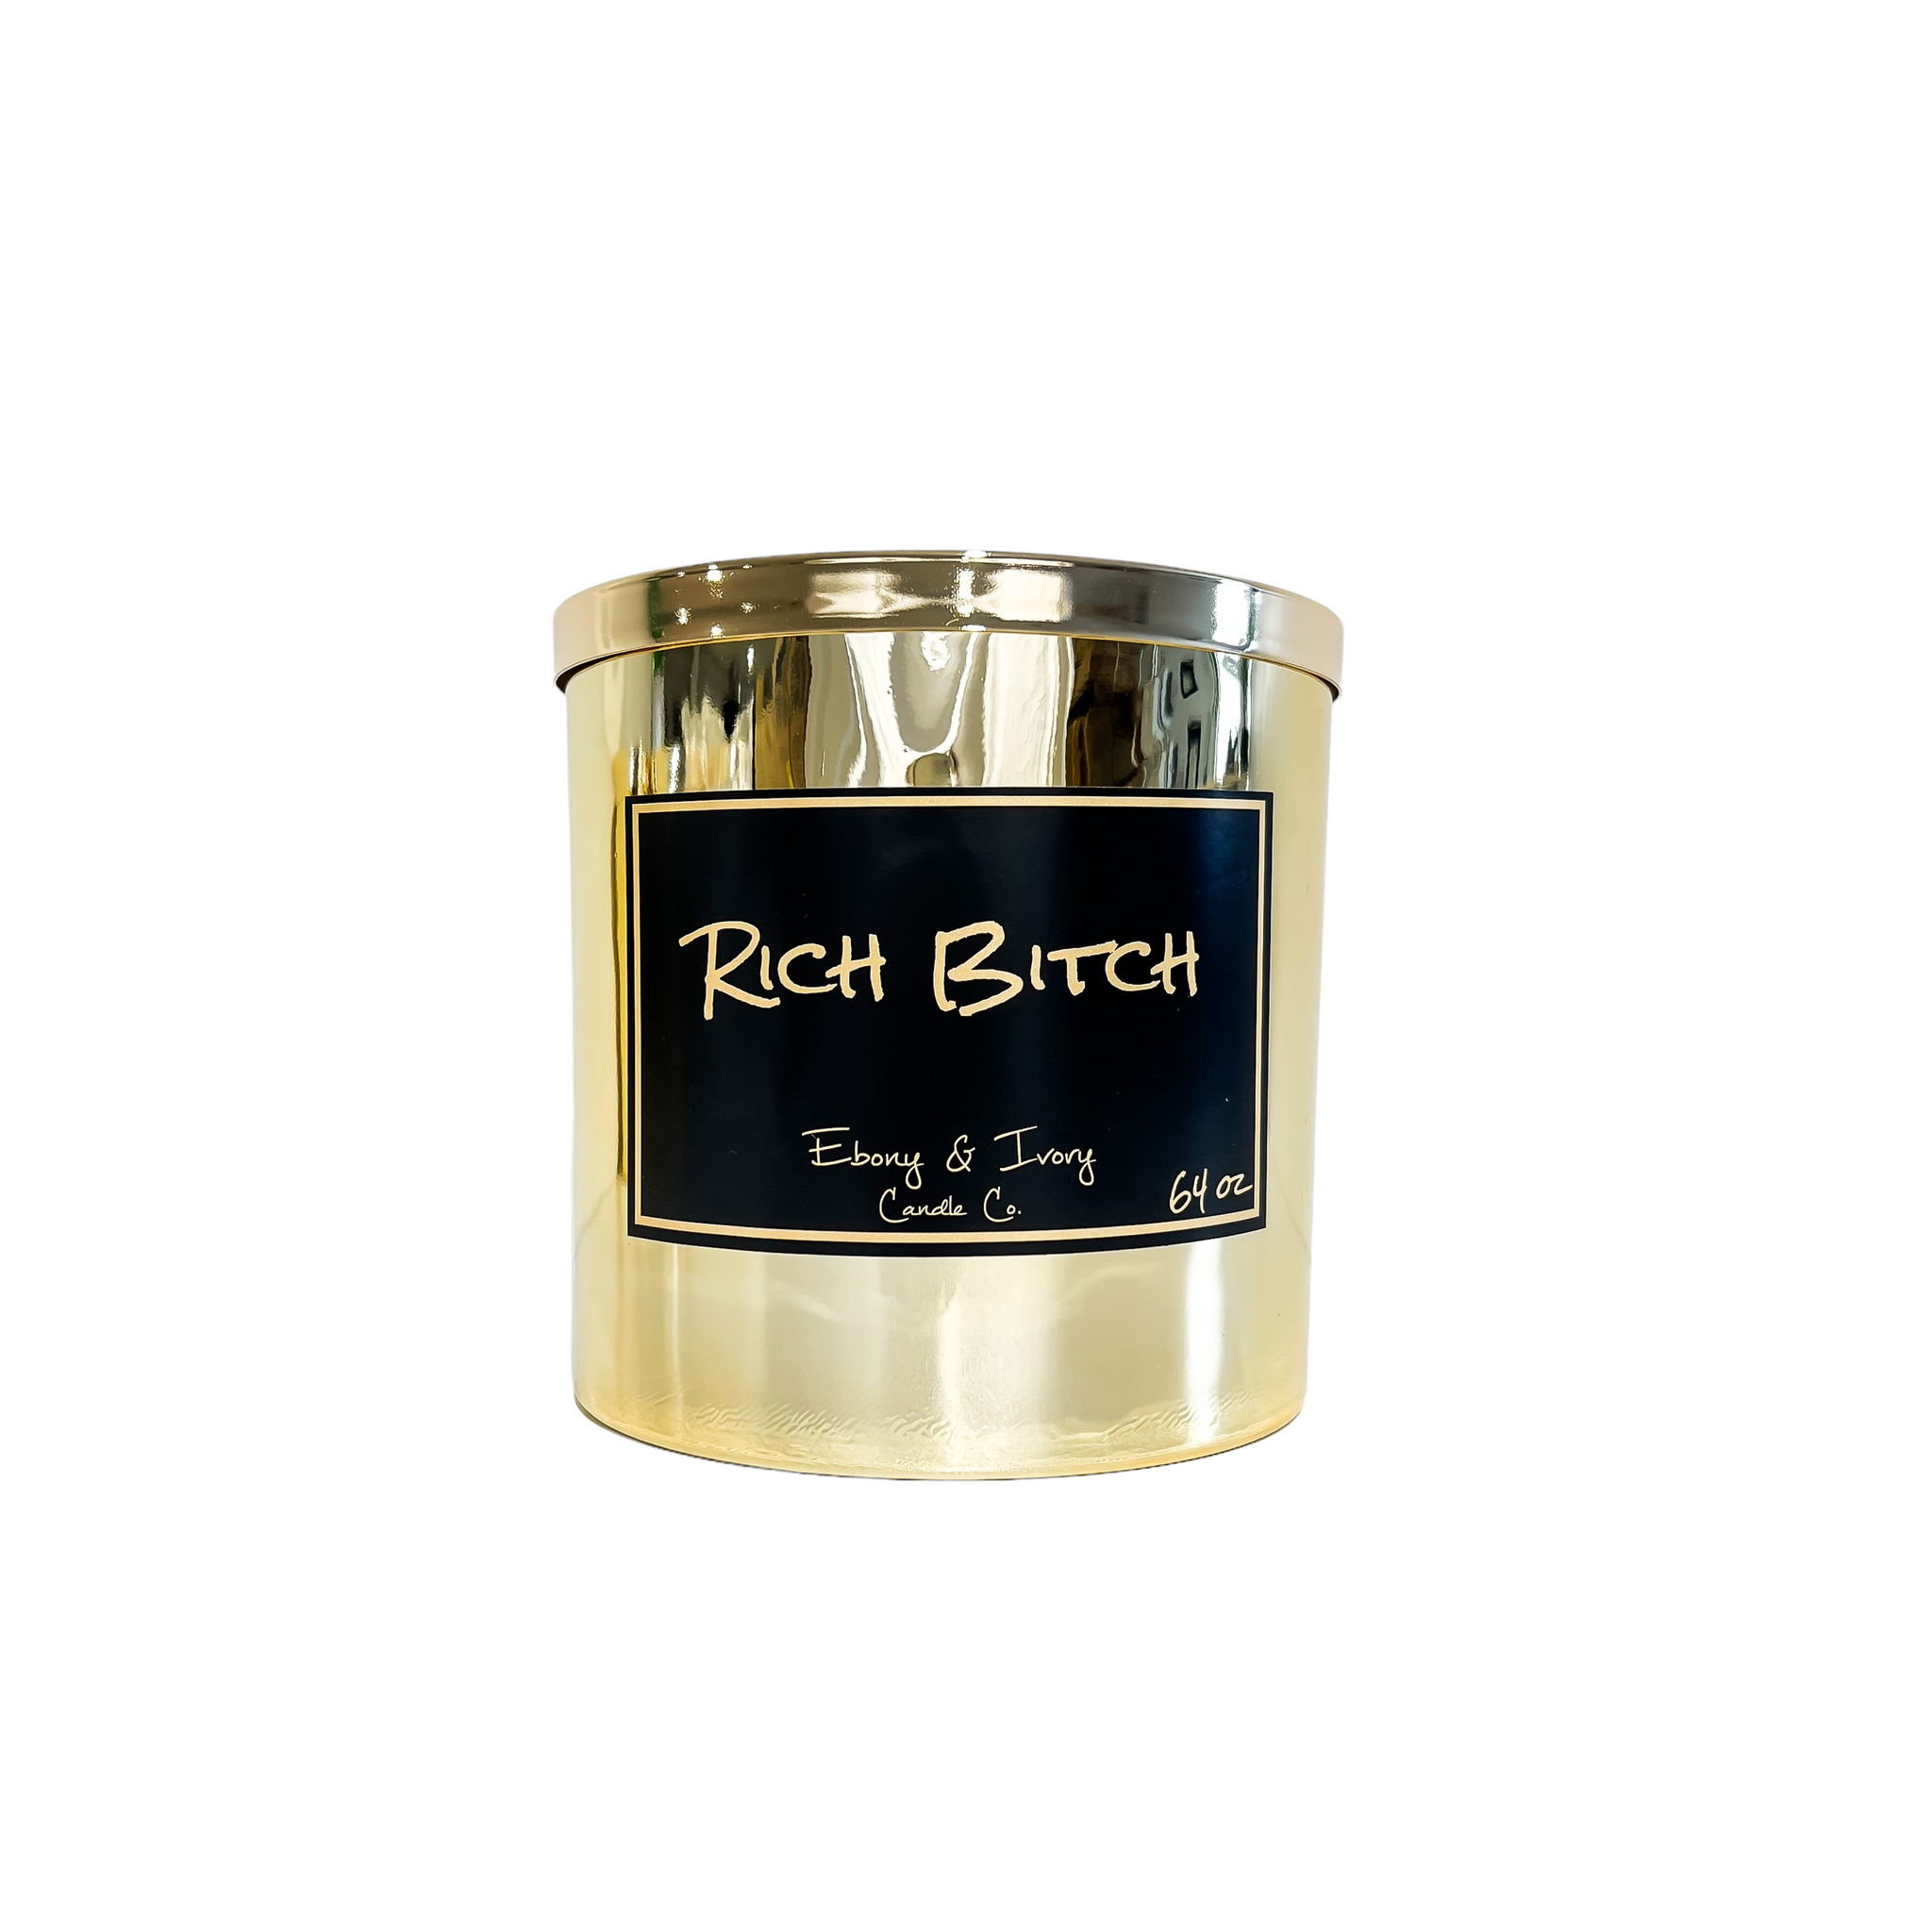 Gold, sixty four ounce, oud, bergamot, and citrus scented soy wax candle with a gold lid and a black label that reads Rich Bitch